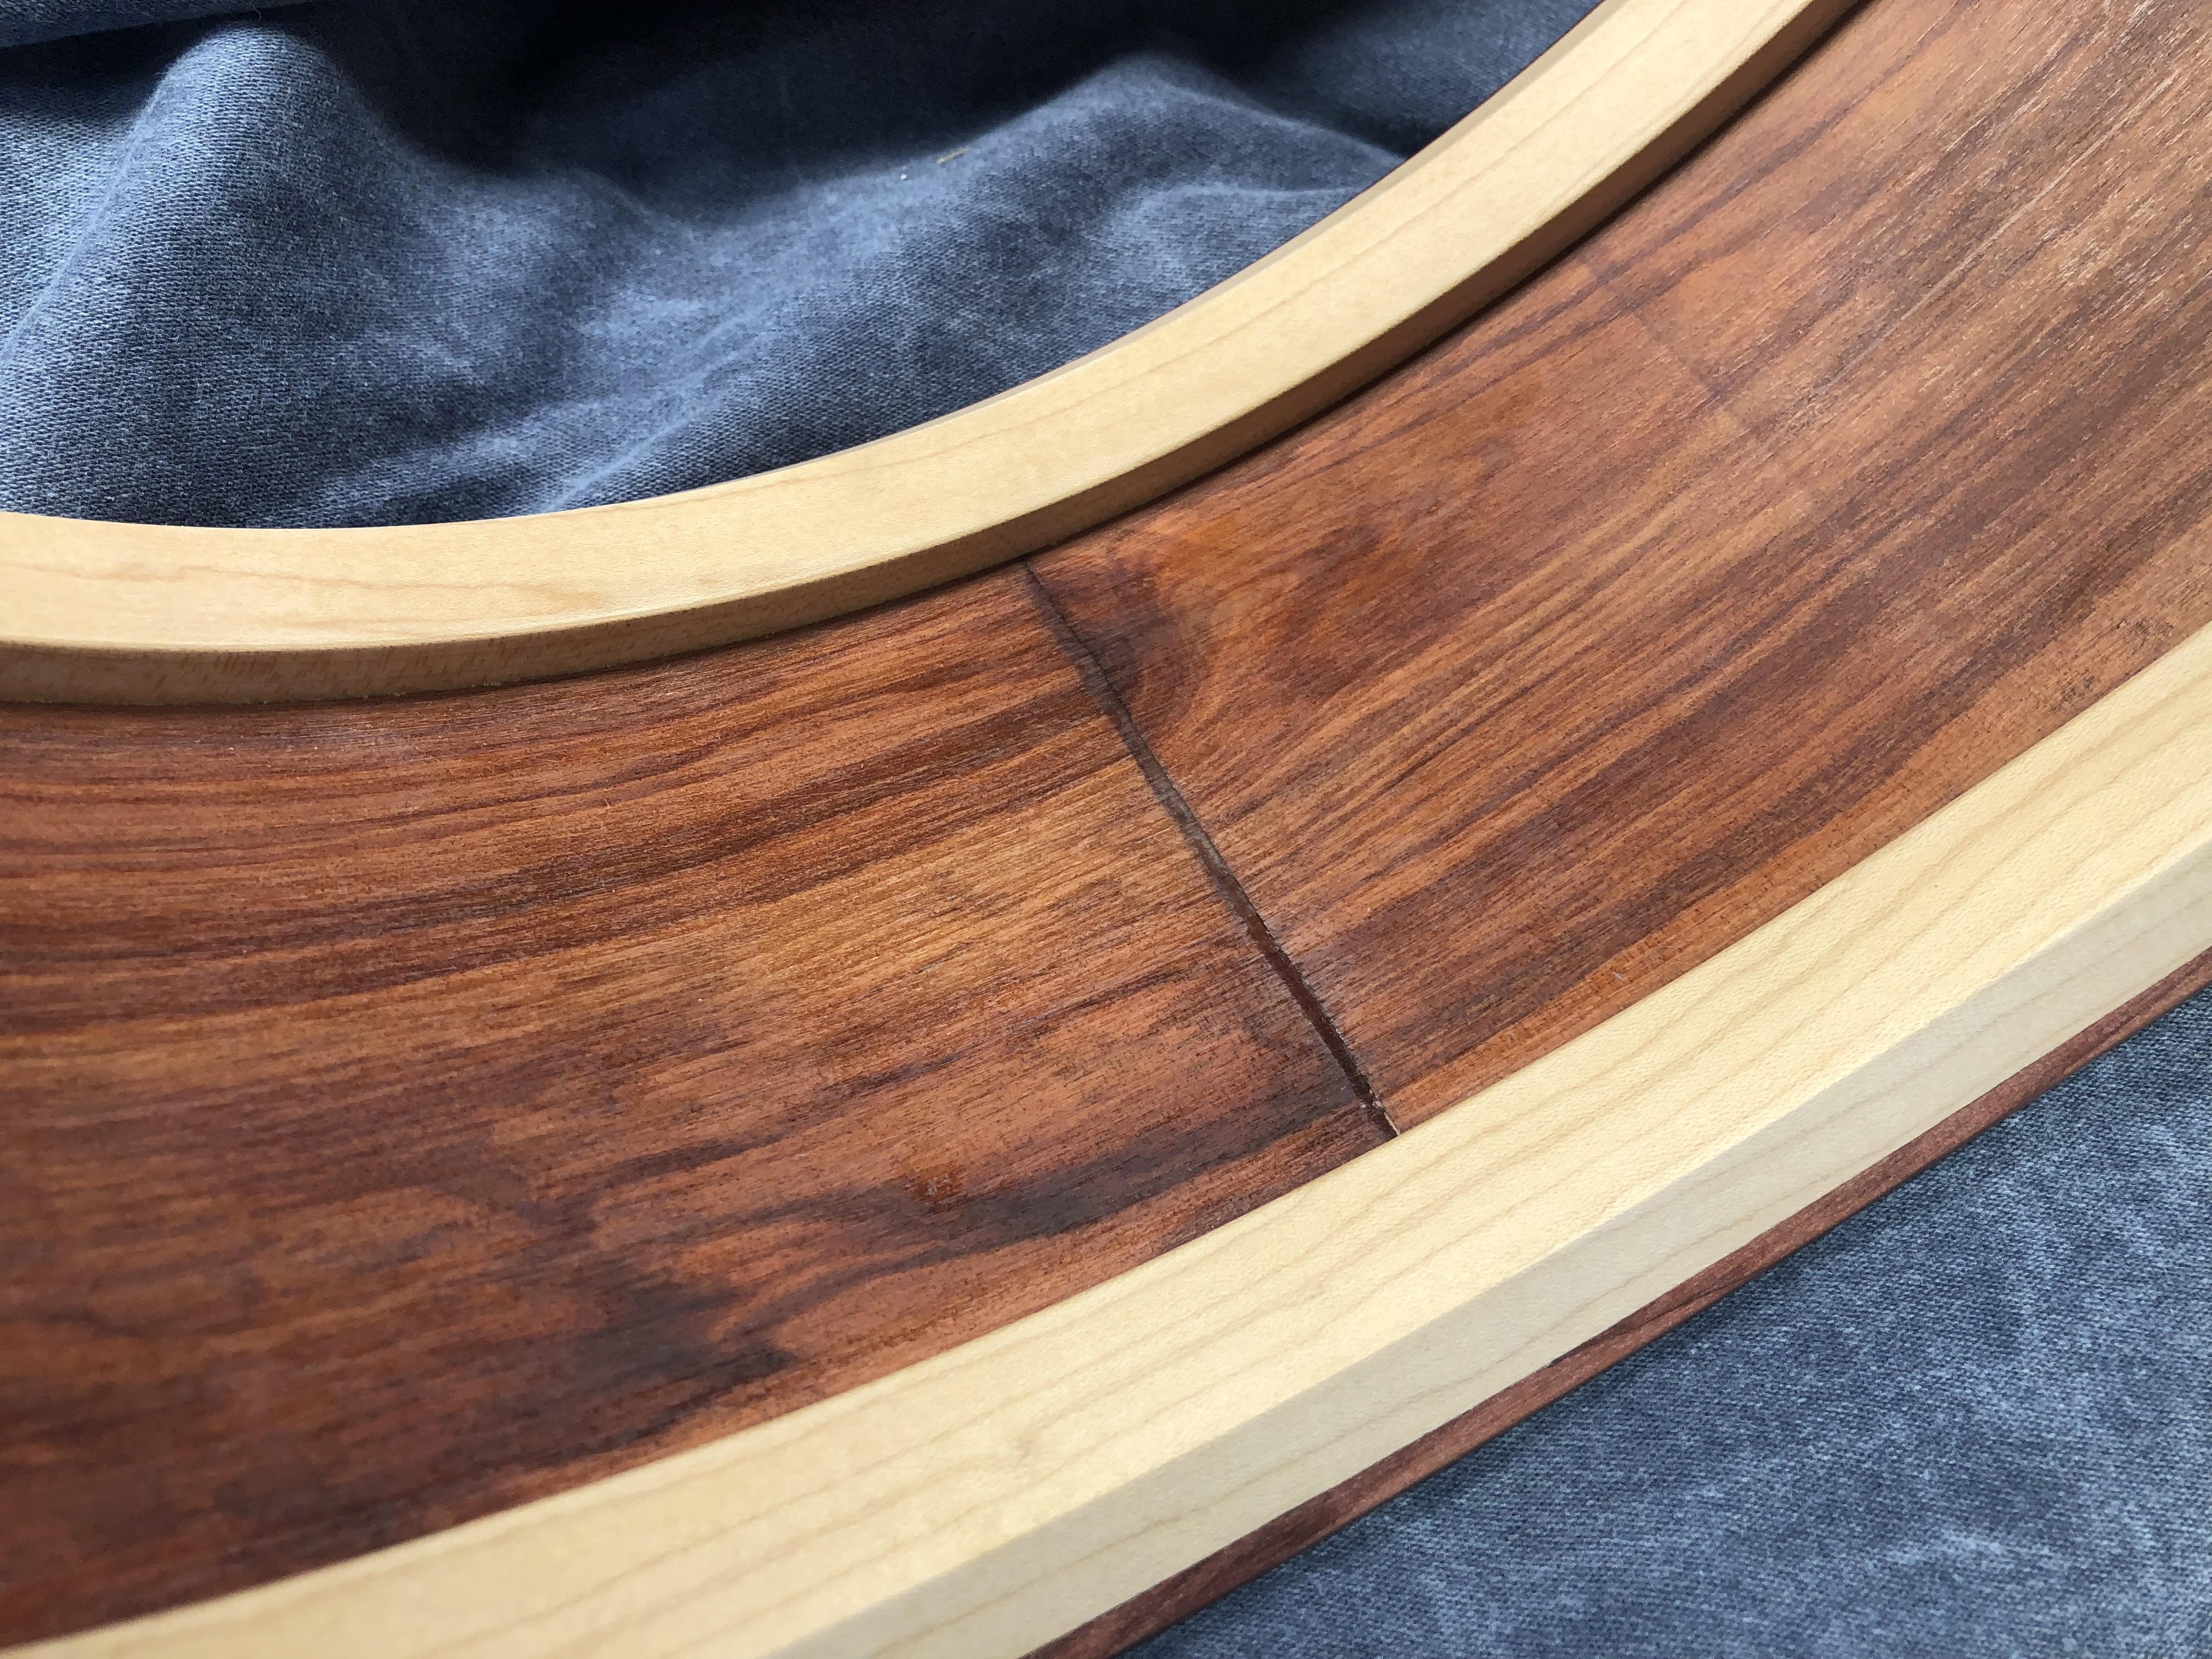 RV.100421.1       Steam Bent Solid Bloodwood Shell with Maple Reinforcing Hoops,                       5 1/2" x 14"